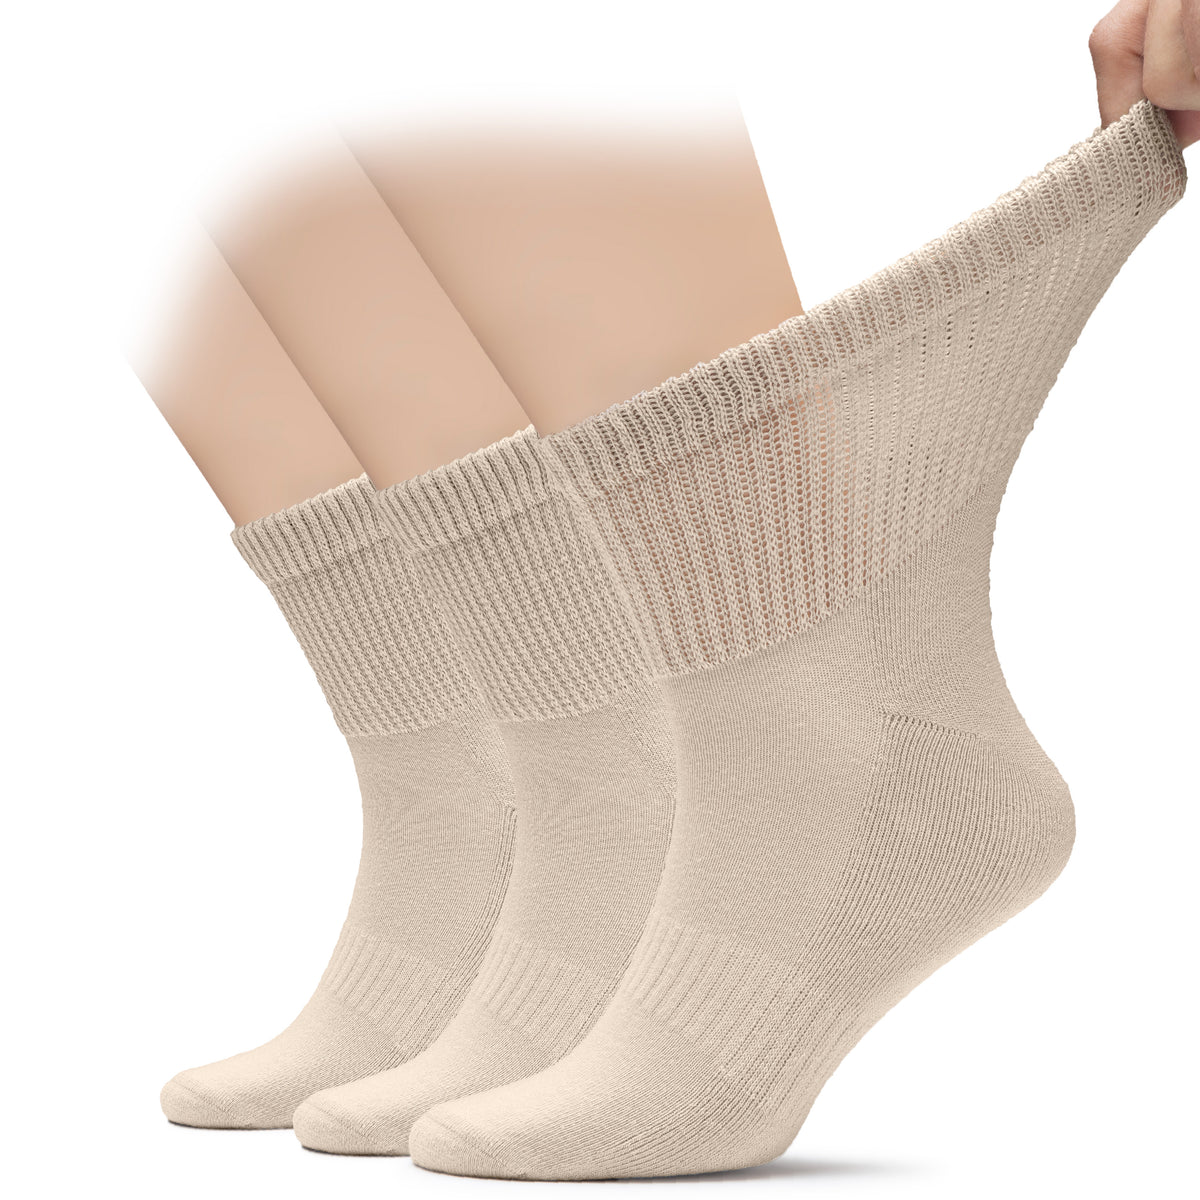 These Men's Diabetic Ankle Socks are designed to provide comfort and support for those with diabetes.